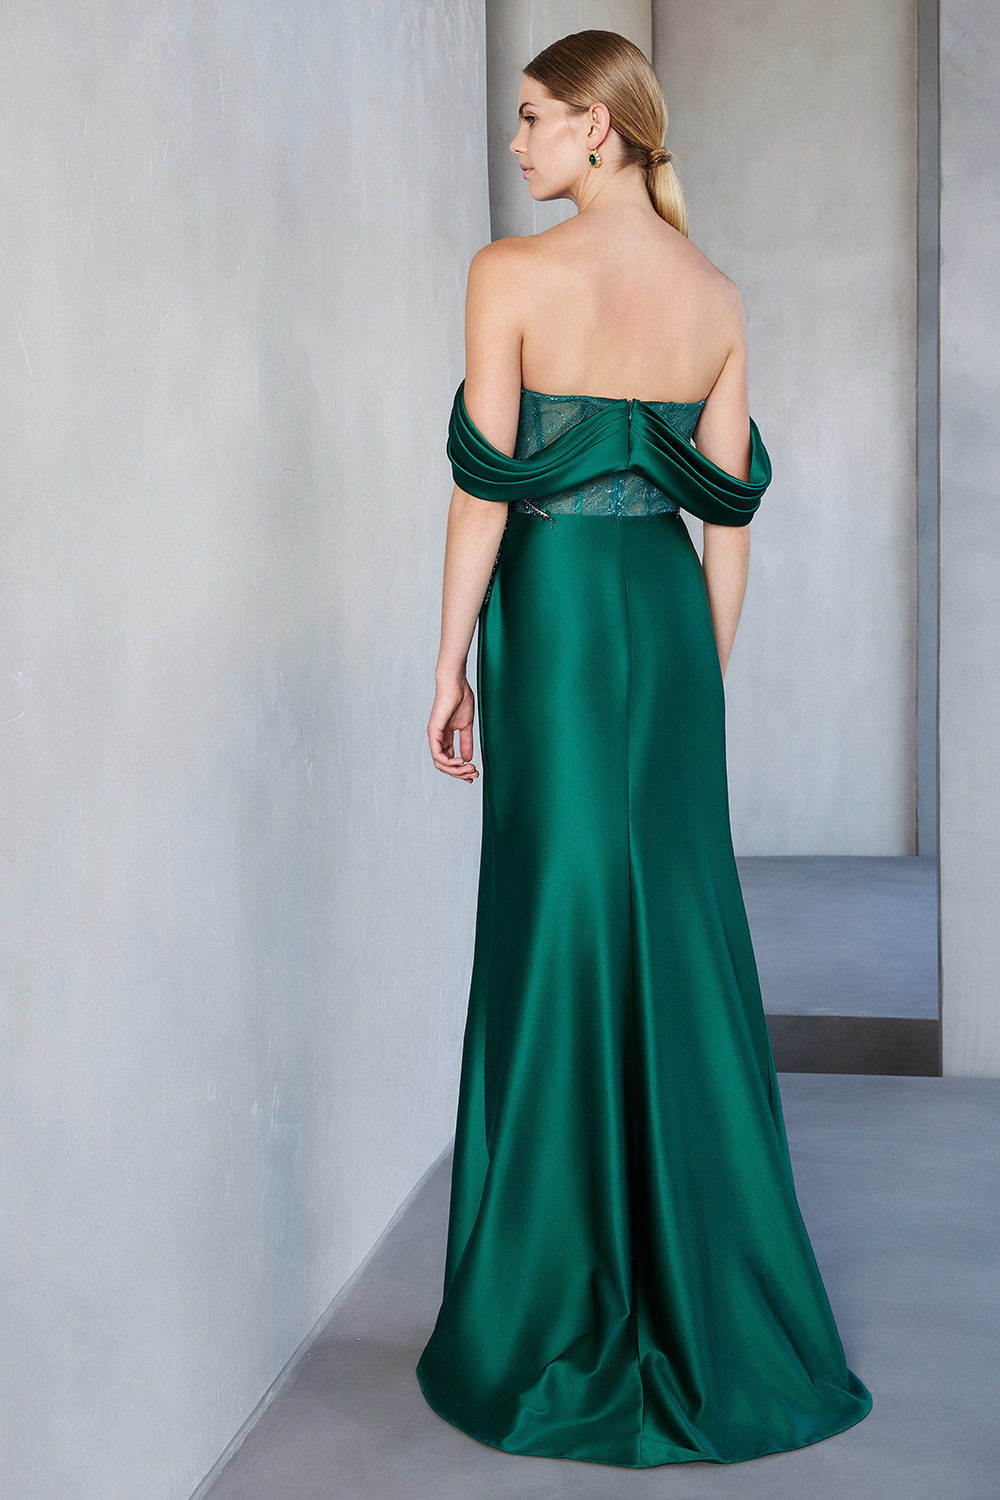 Long evening satin dress with lace and beading at the top